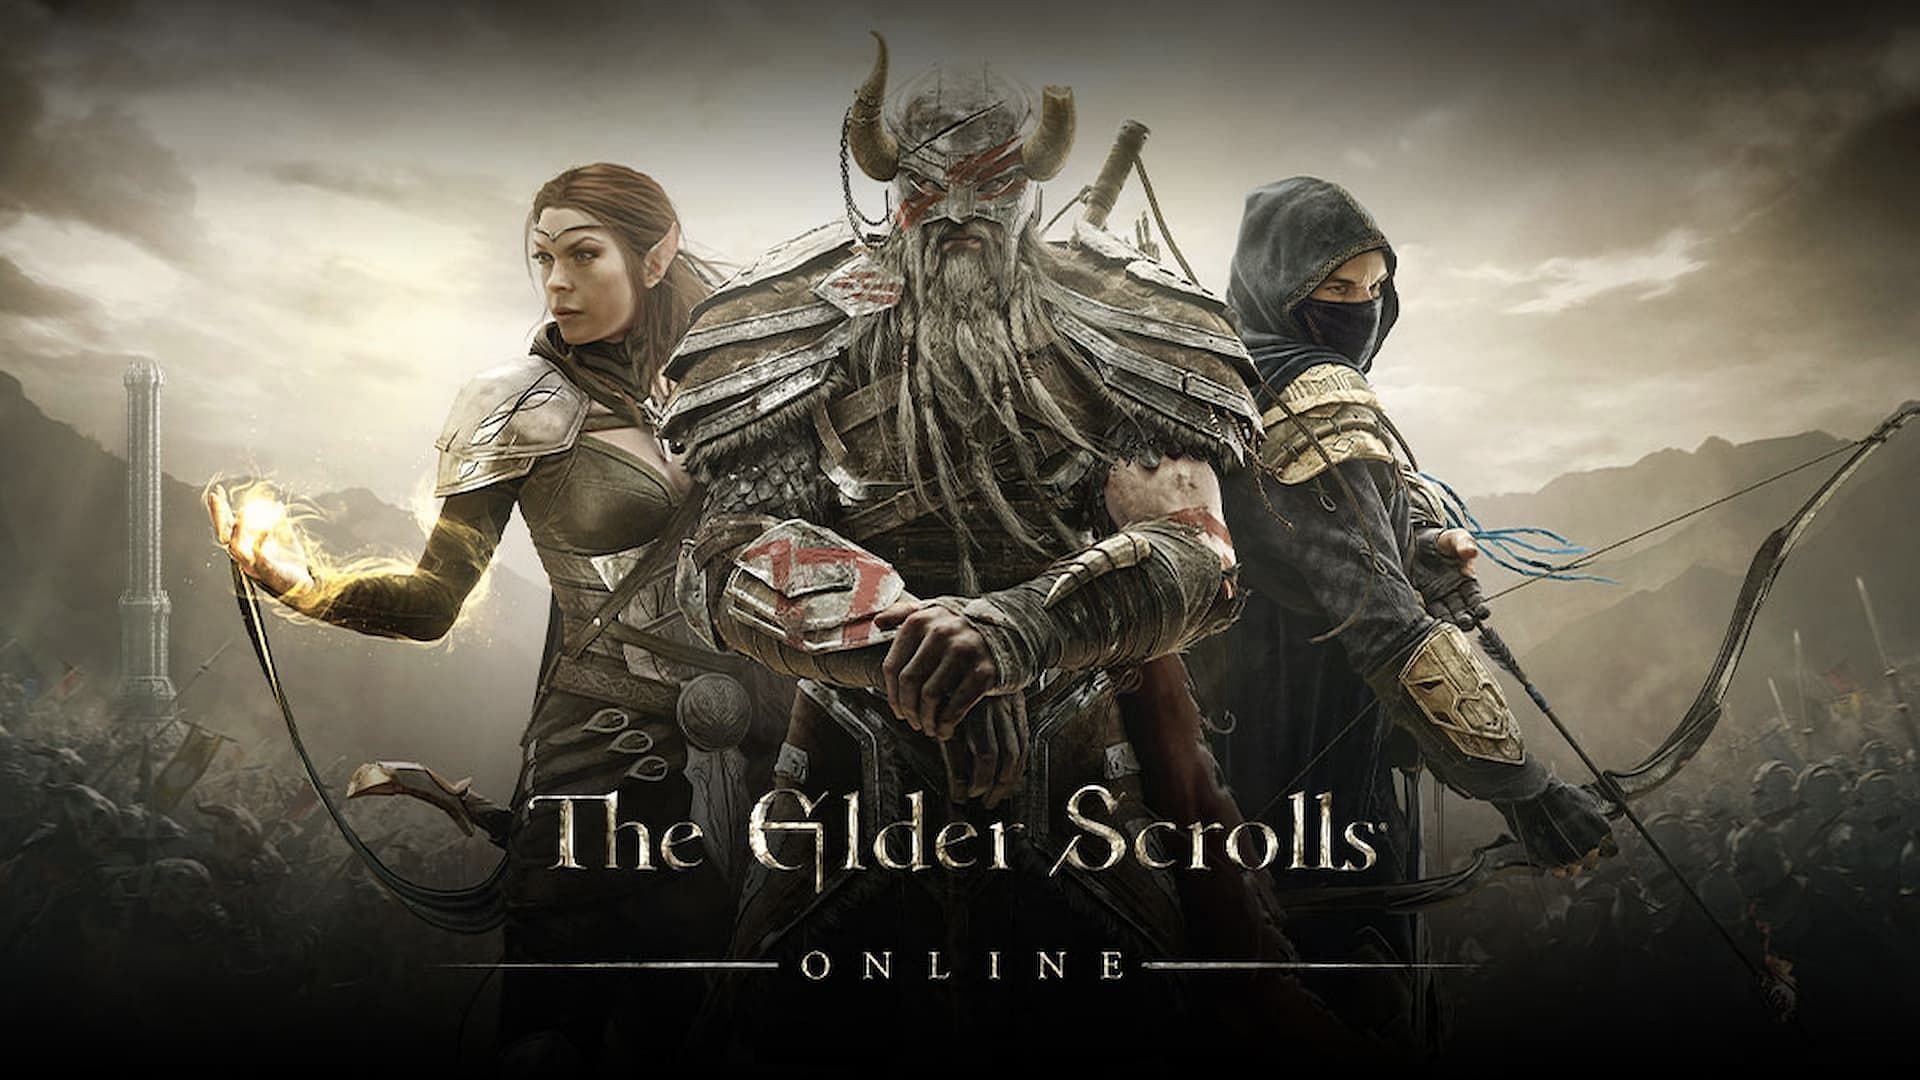 The Elder Scrolls Online continues to be popular among MMORPG fans (Image via Bethesda)